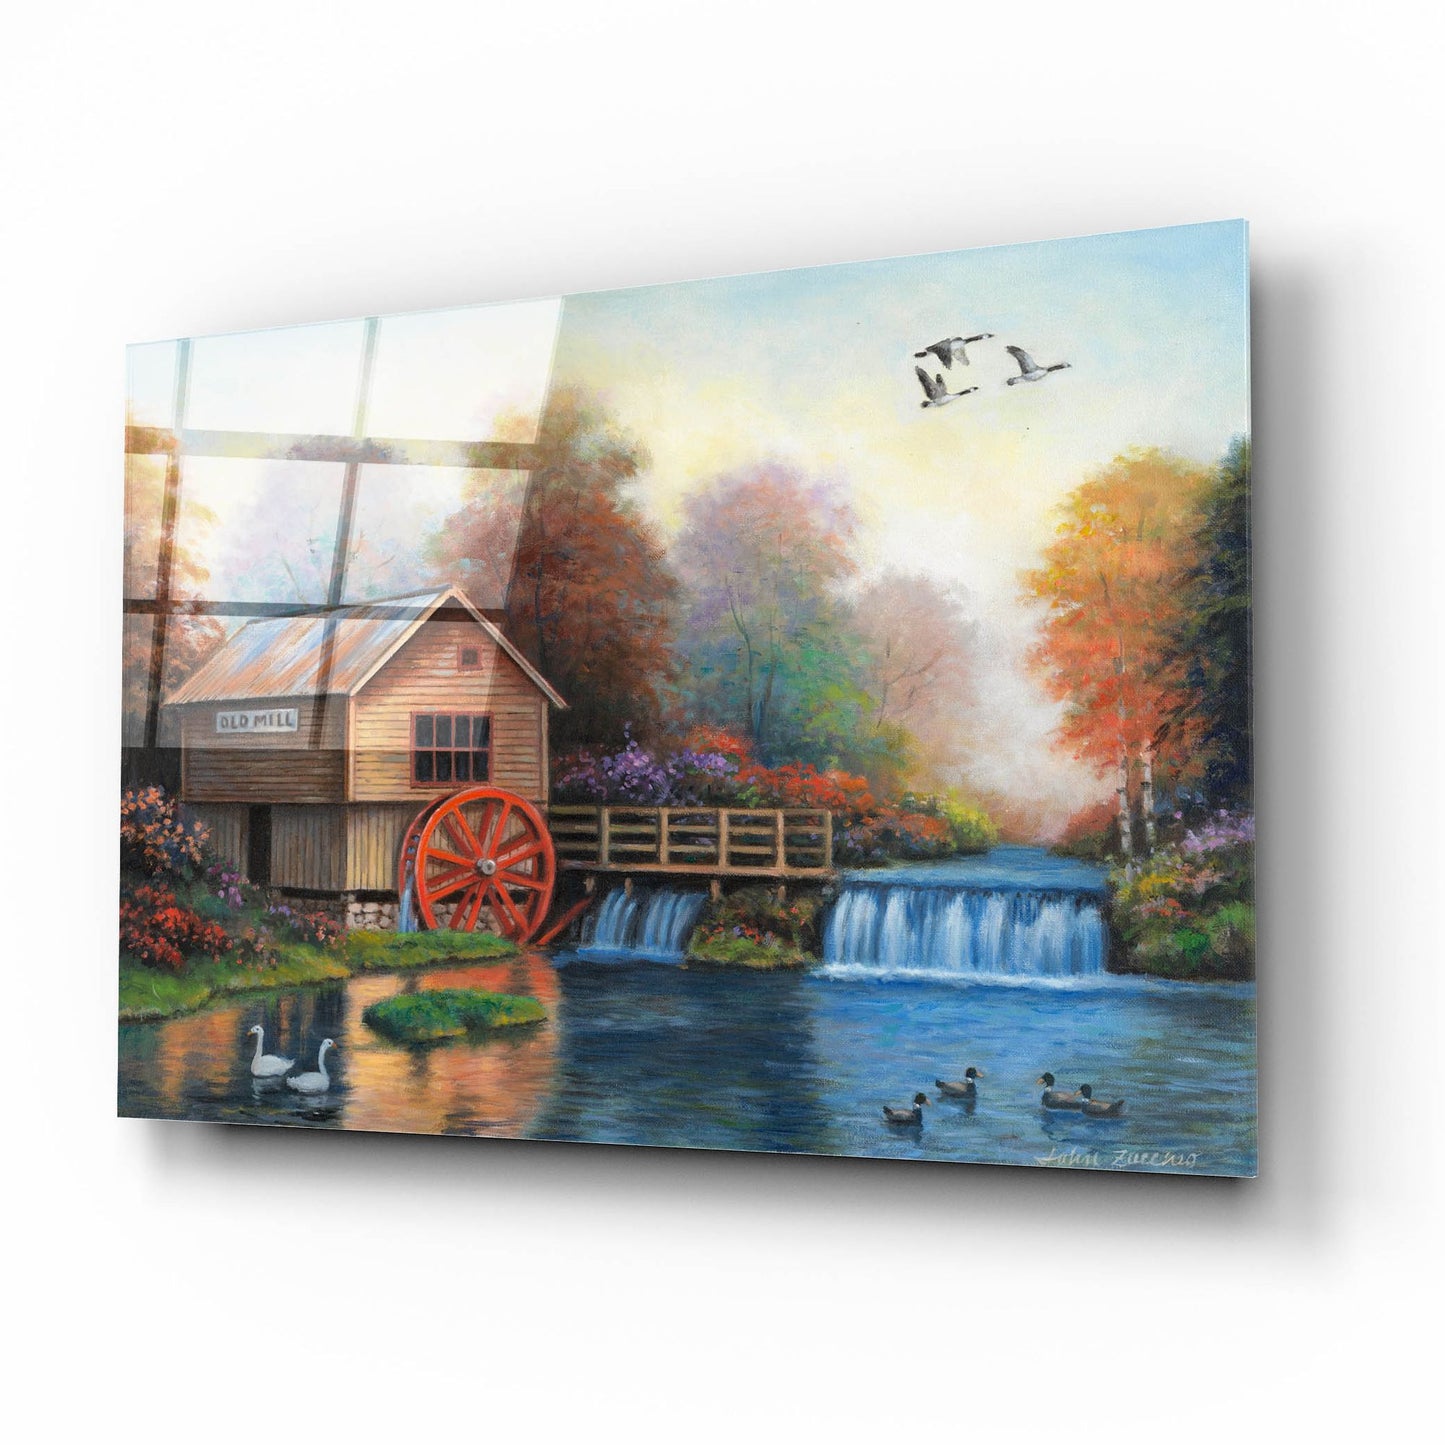 Epic Art 'Autumn at the Old Mill' by John Zaccheo, Acrylic Glass Wall Art,16x12